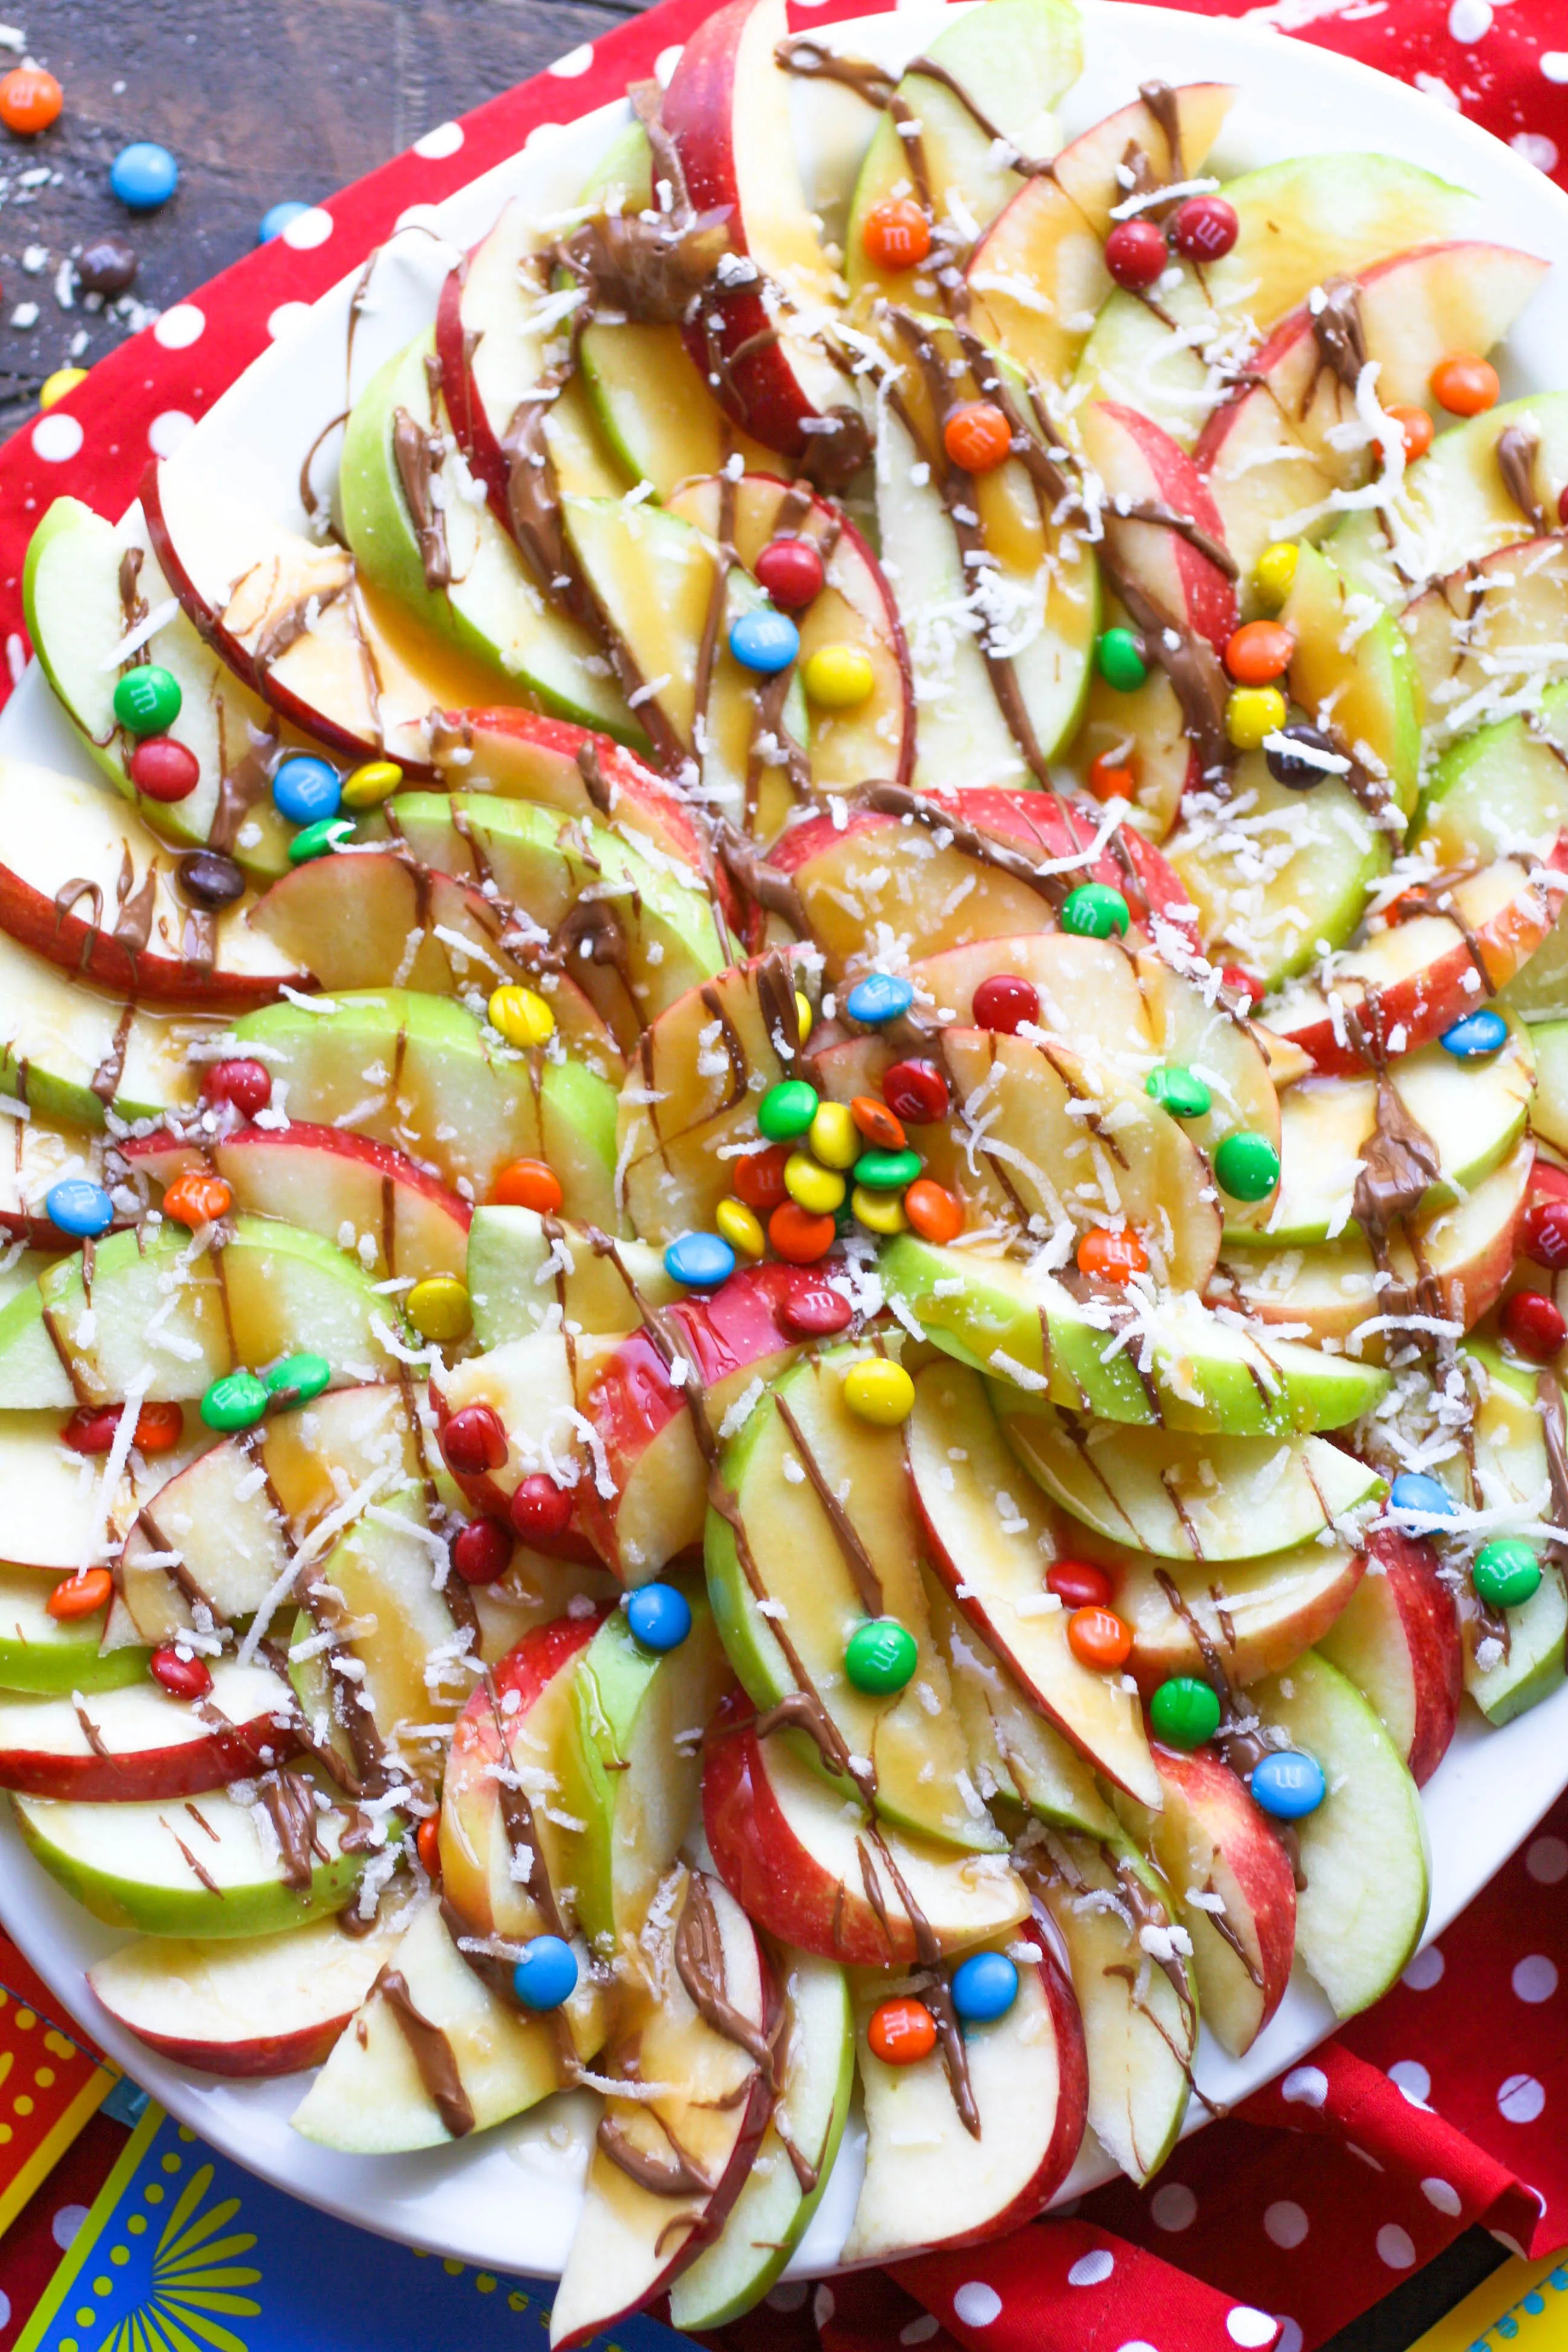 Apple nachos with chocolate & caramel drizzle are festive and fun any day of the week!